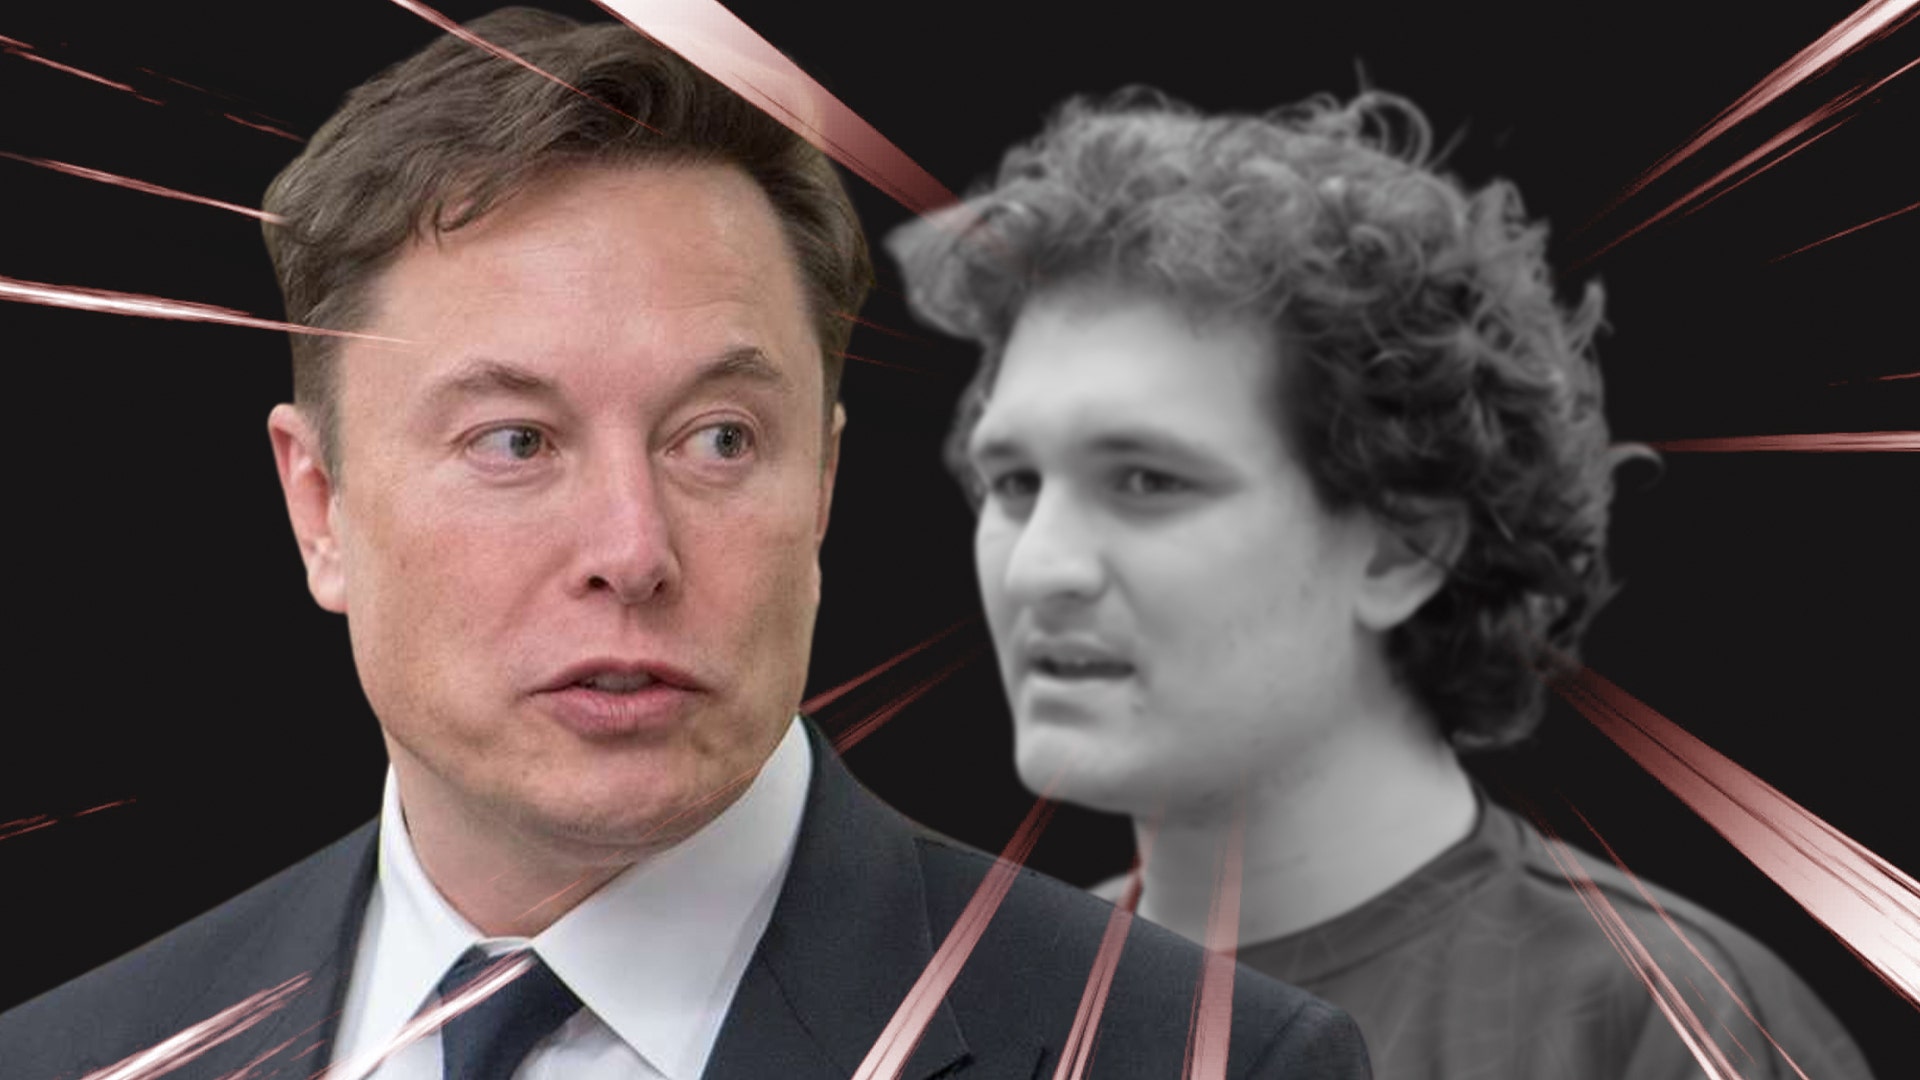 Elon Musk Says Sam Bankman-Fried Should Go To Prison: 'Let's Give Him An Adult Timeout In The Big House'